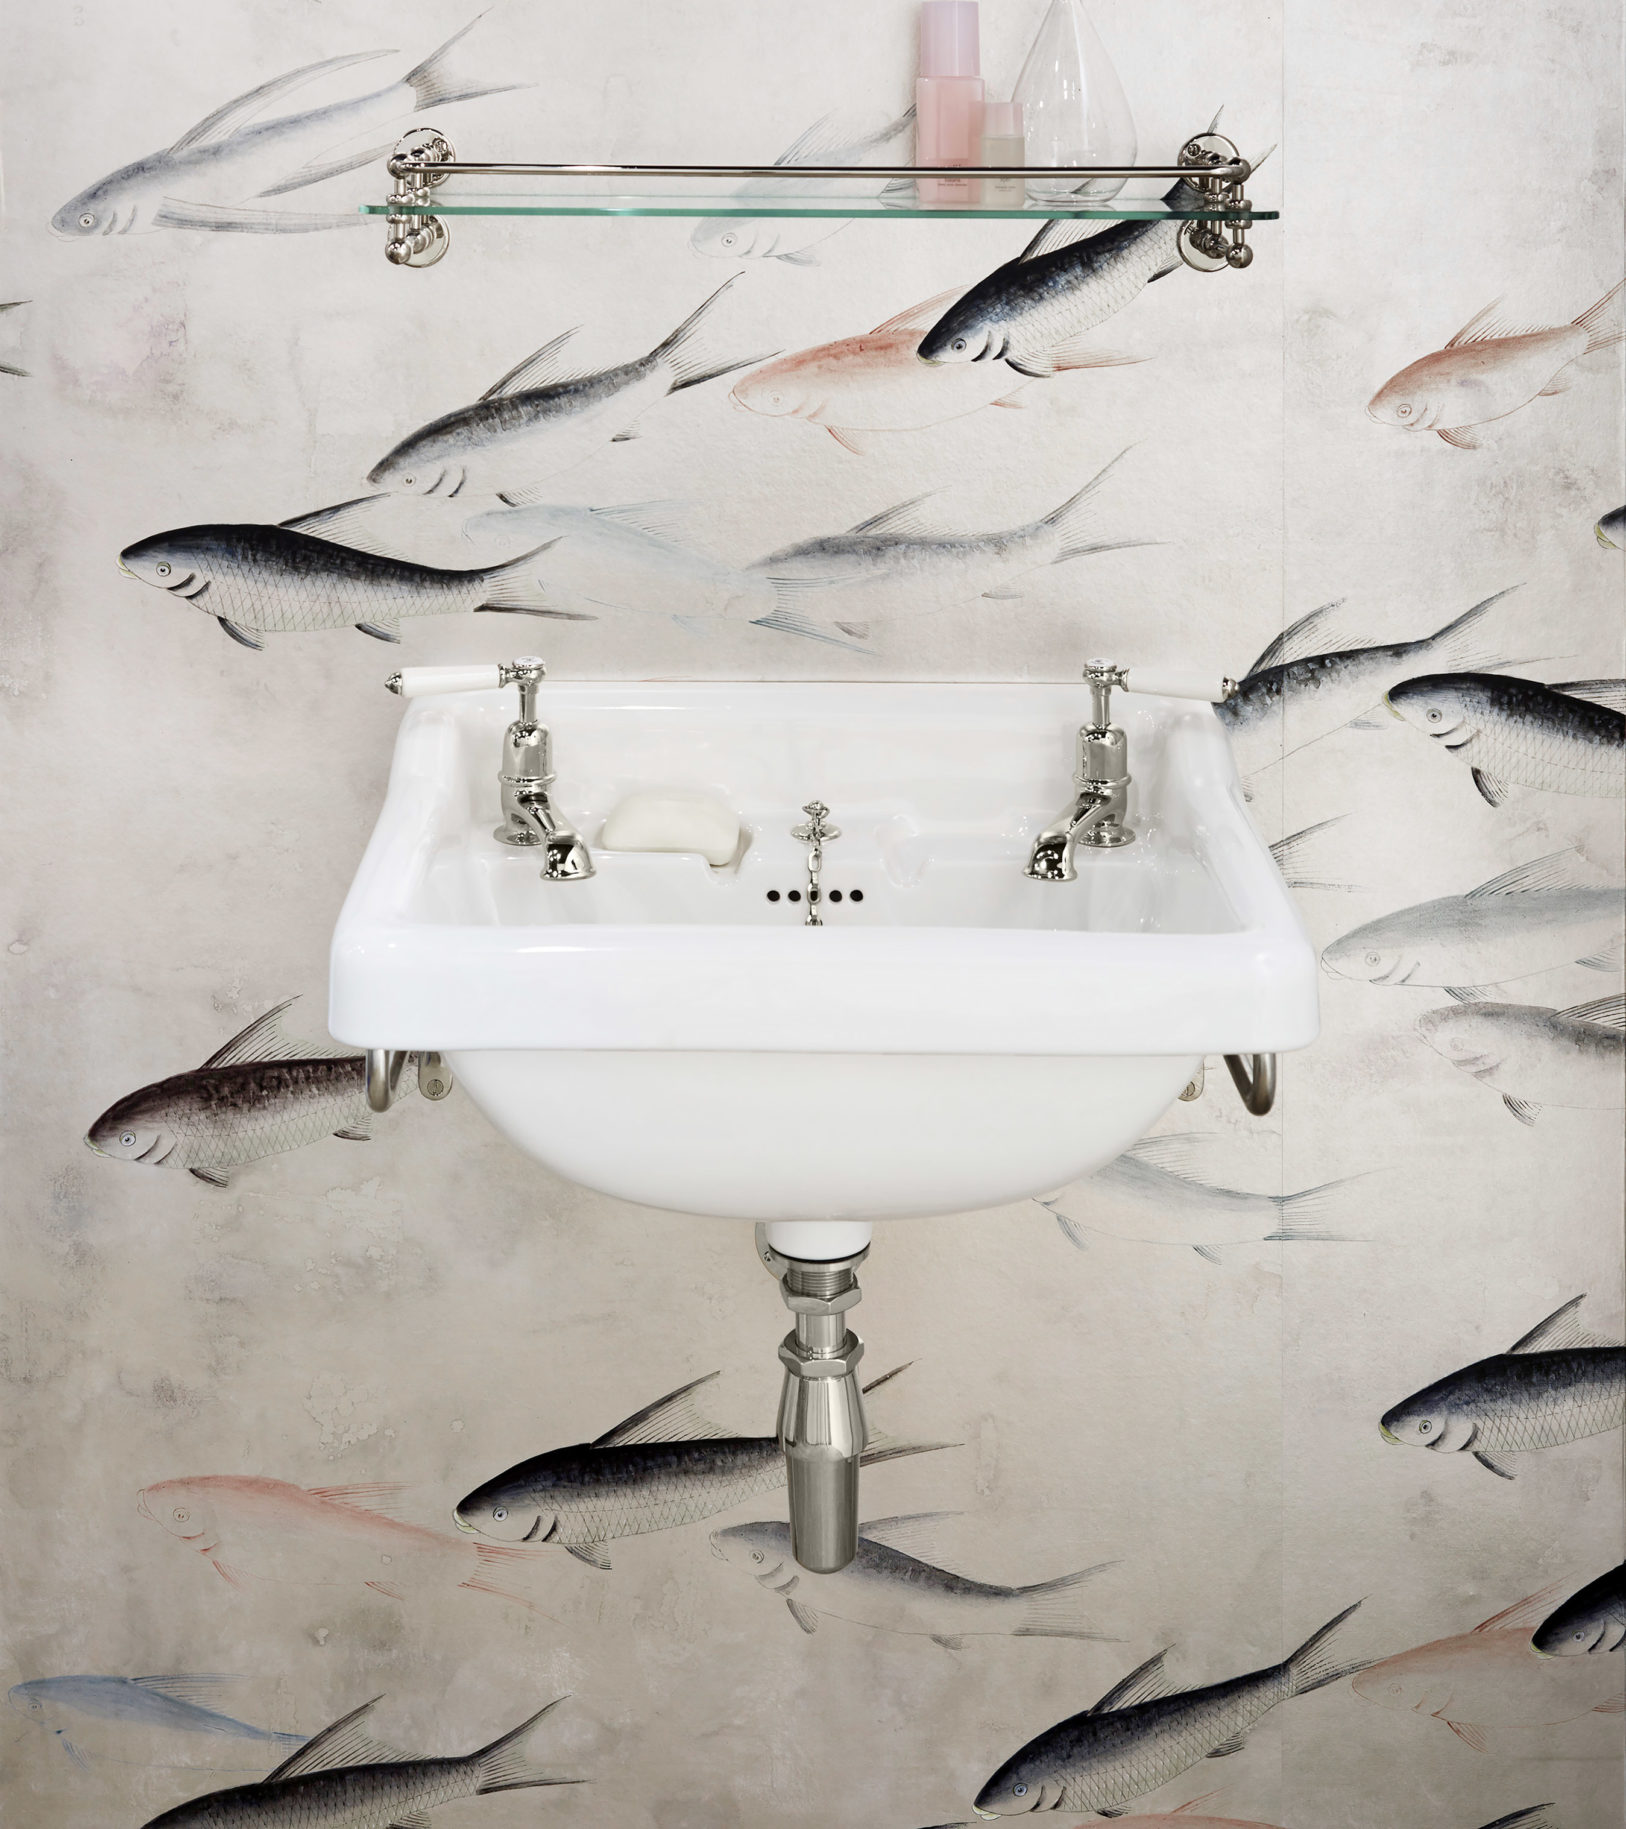 The Syre china wall mounted vanity basin in nickel finish